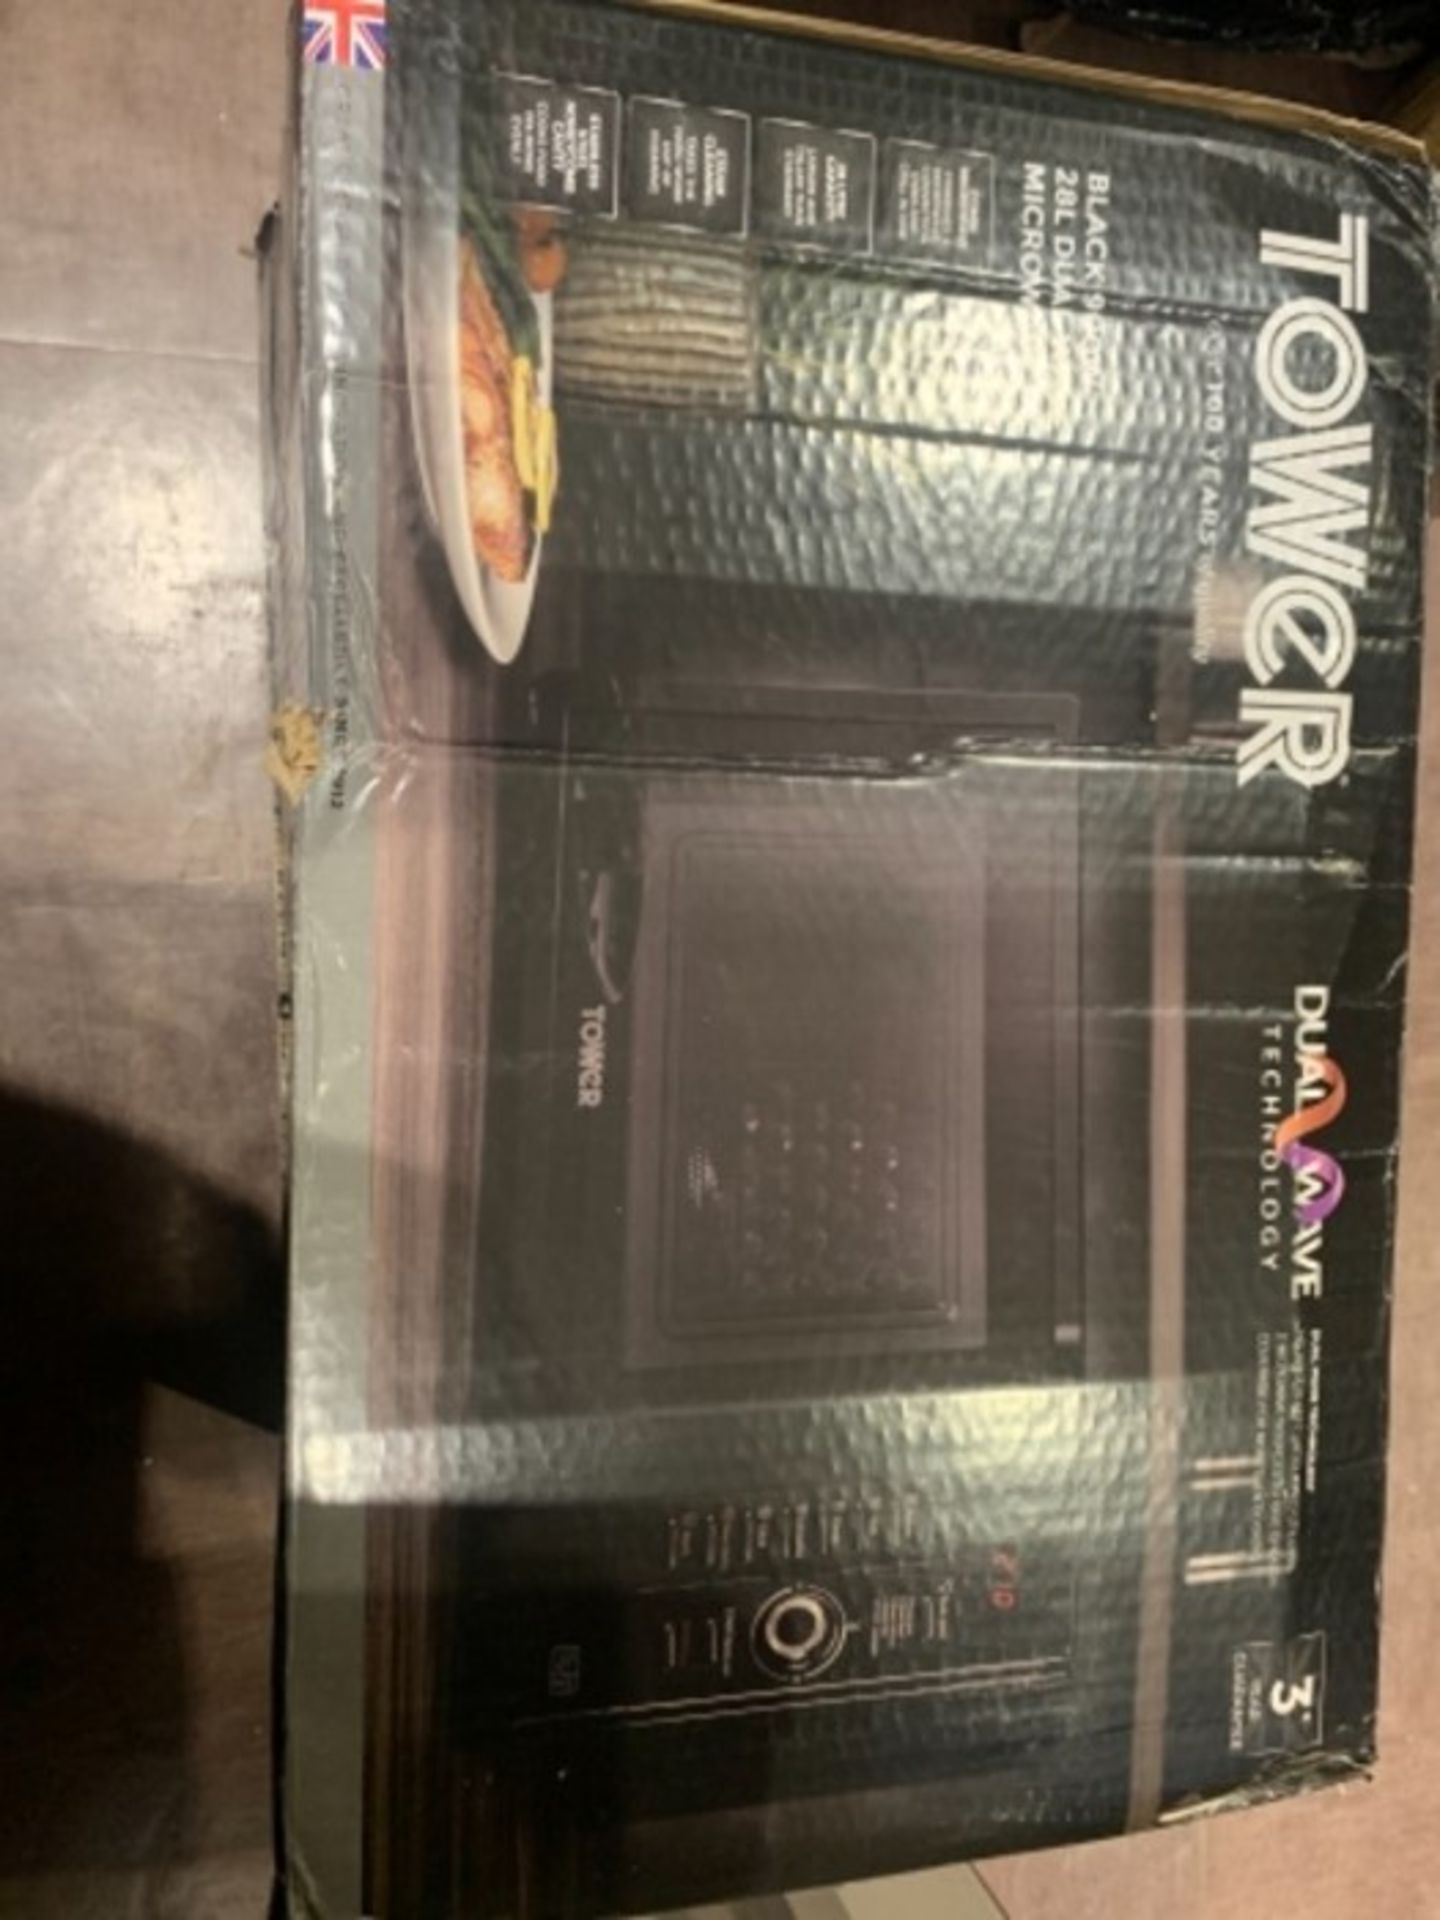 RRP £123.00 Tower KOC9C0TBKT Dual Heater Combination Oven with Microwave/Grill/Convection Oven Fun - Image 2 of 3